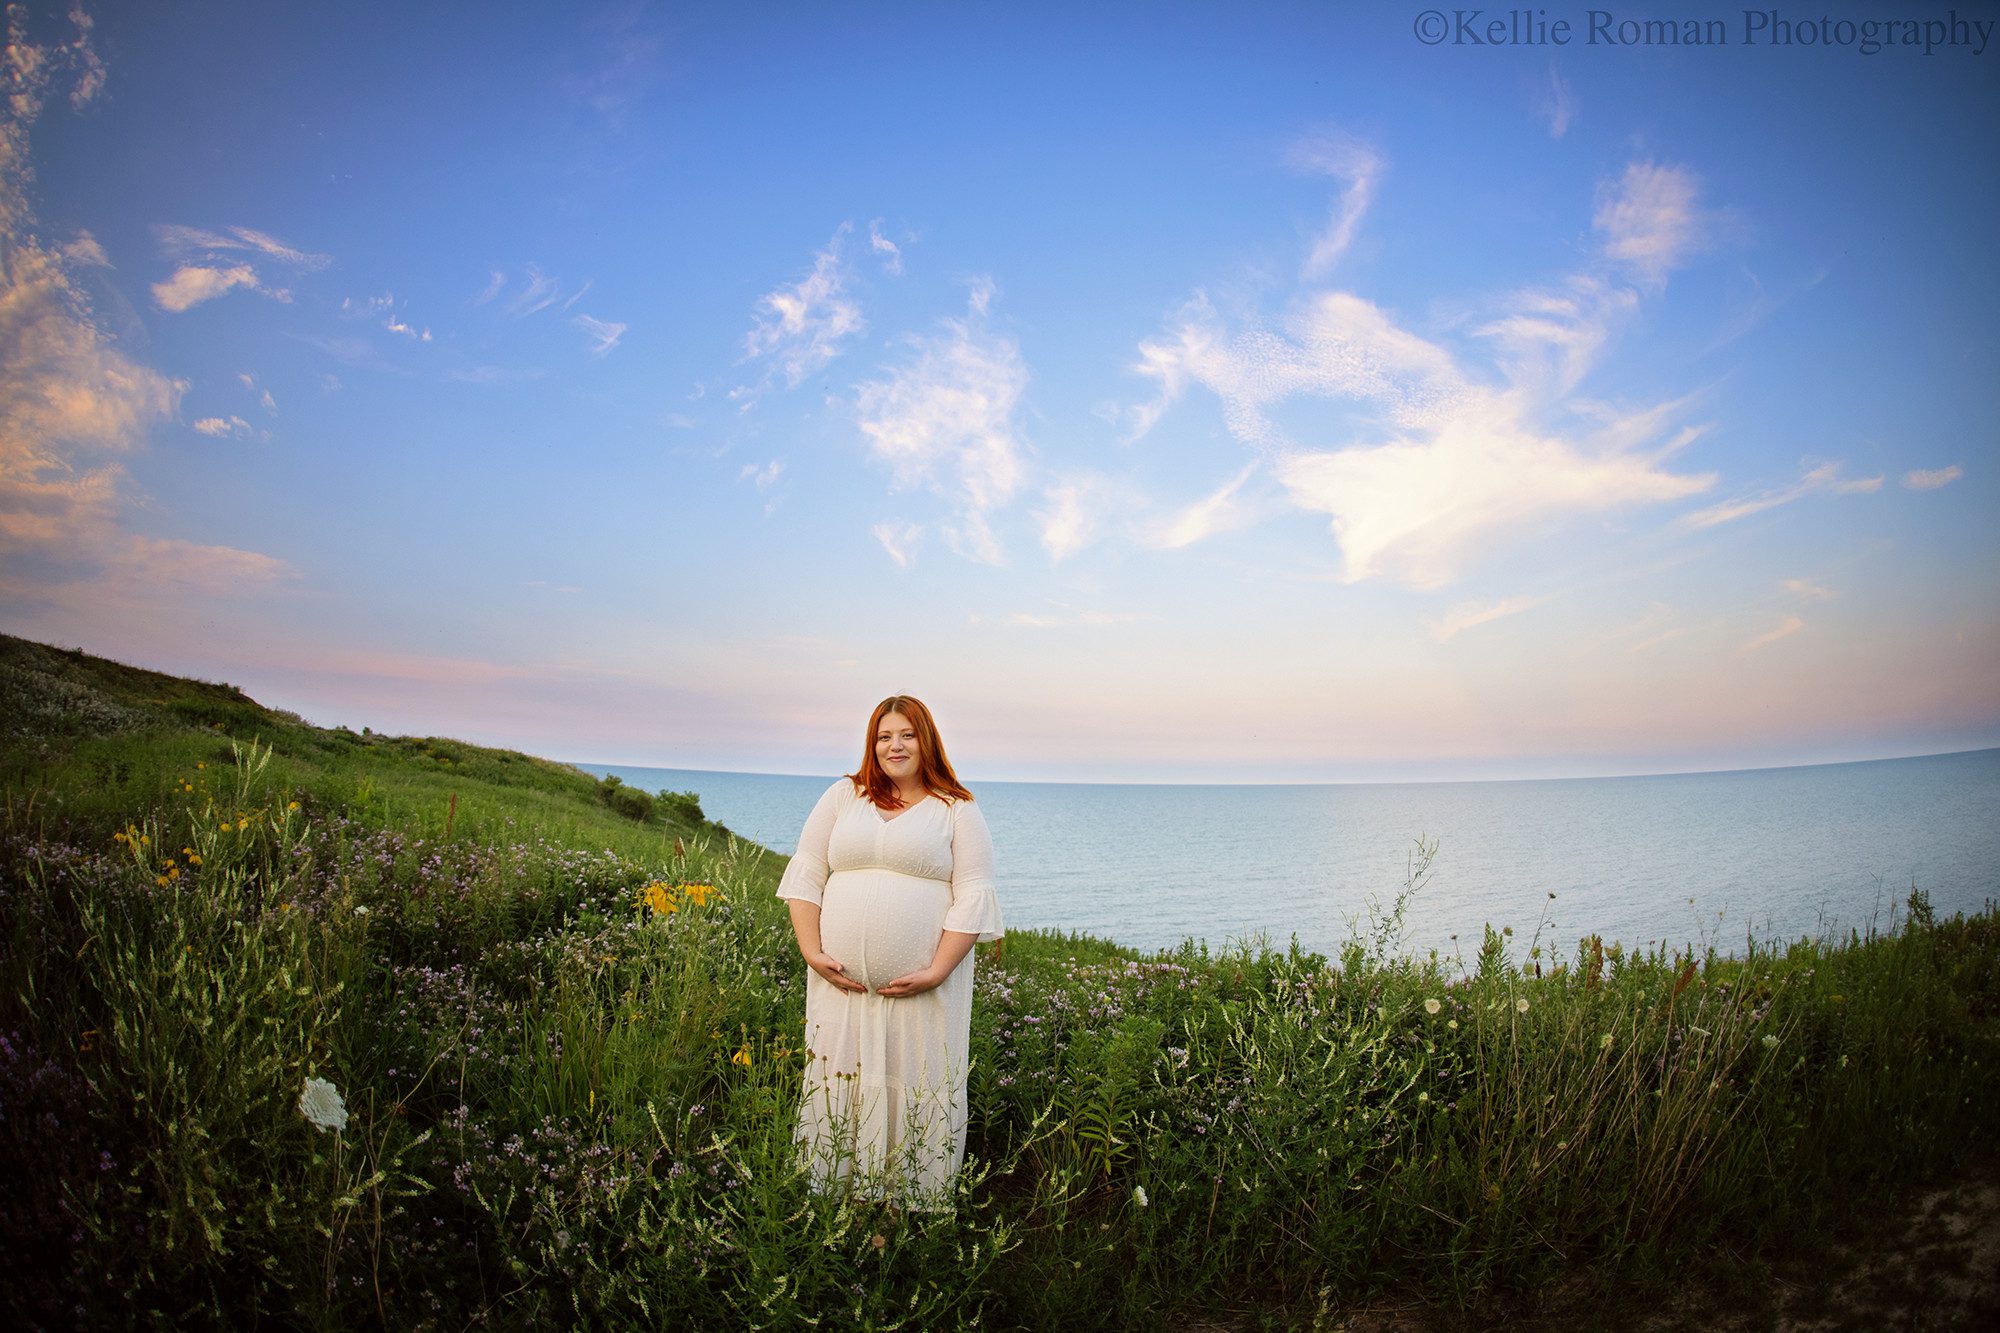 milwaukee maternity photographer. a pregnant soon to be mom is standing on a green grassy bluff overlooking Lake Michigan and a beautiful summer pastel sky. the women is smiling and looking into the camera. she is wearing a cream colored dress and is holding onto her belly. she's surrounded by wild flowers.